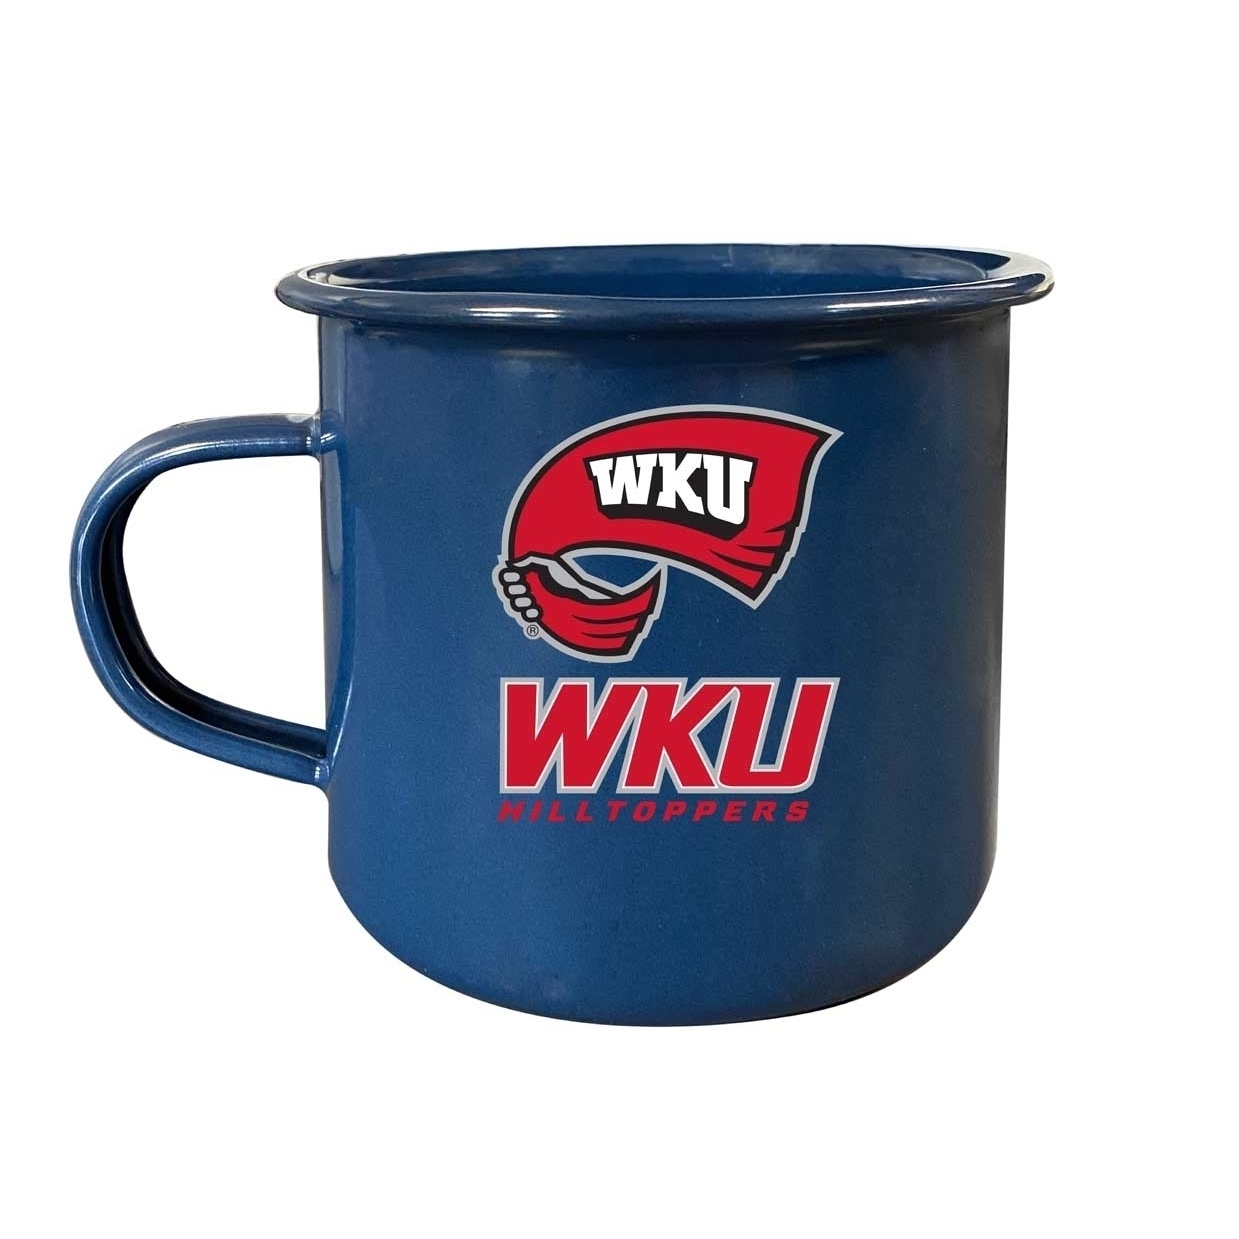 Western Kentucky Hilltoppers Tin Camper Coffee Mug - Choose Your Color - Navy